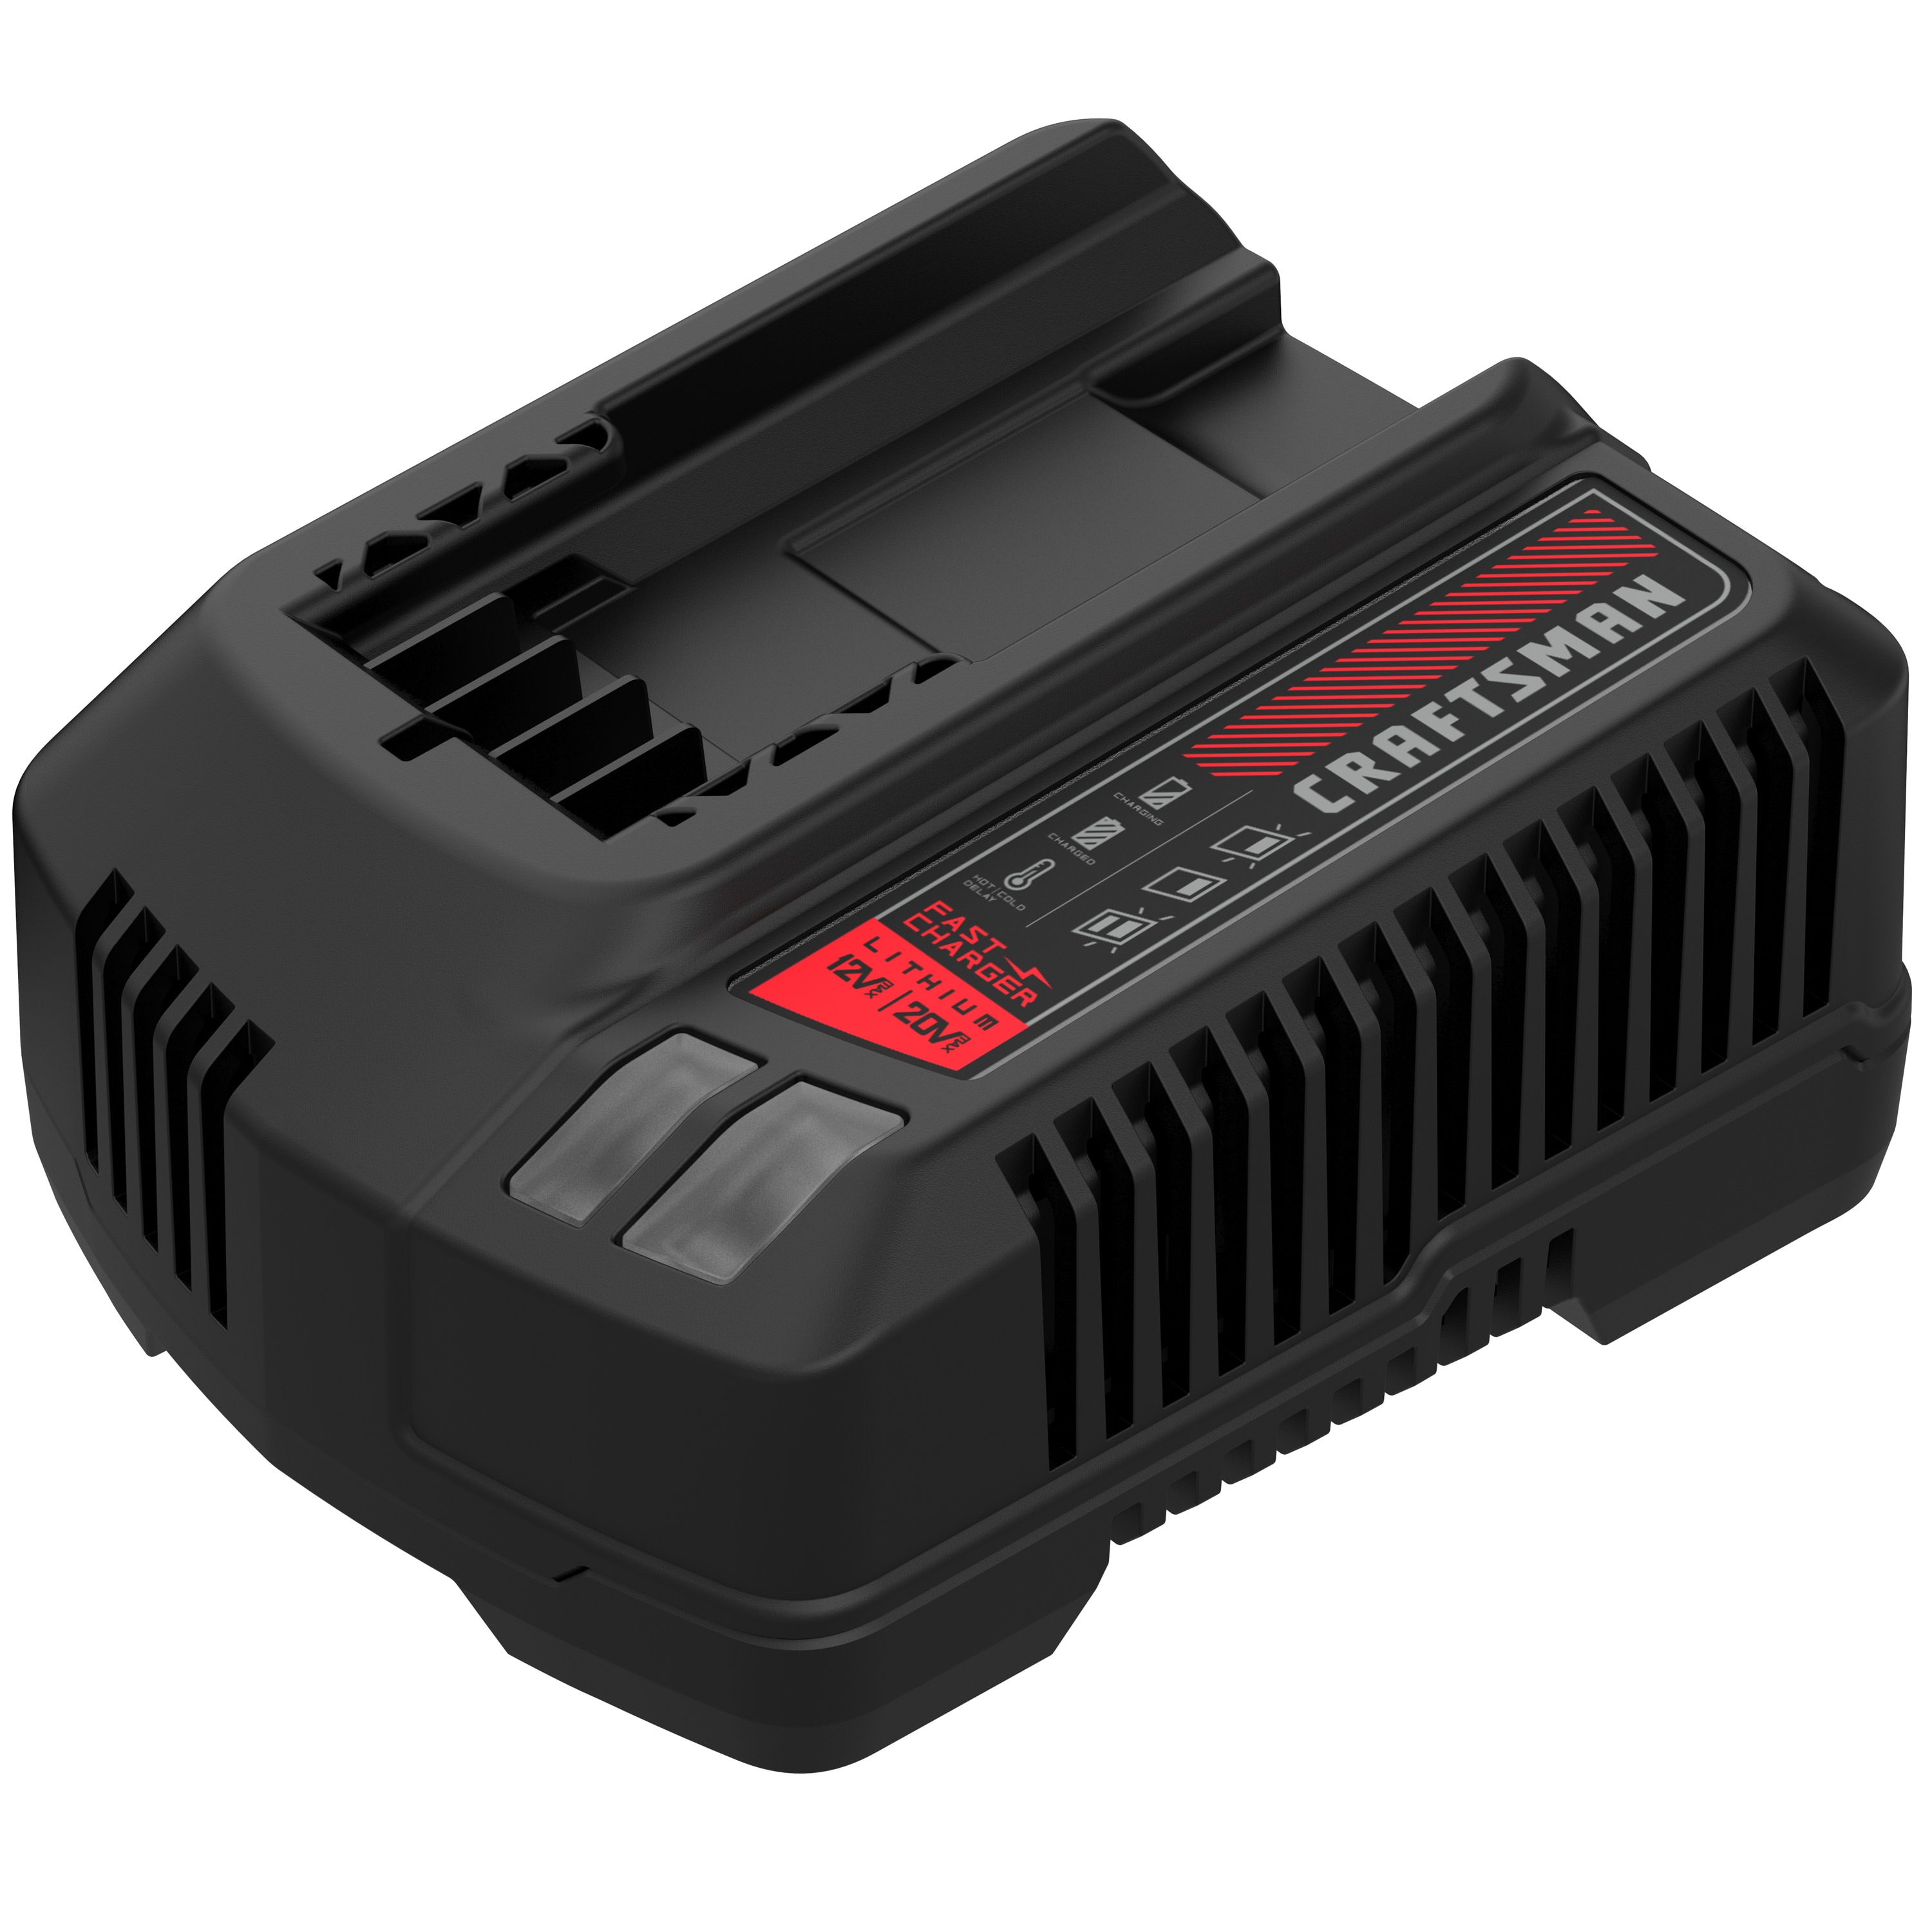 CRAFTSMAN Power Tool Batteries & Chargers at Lowes.com